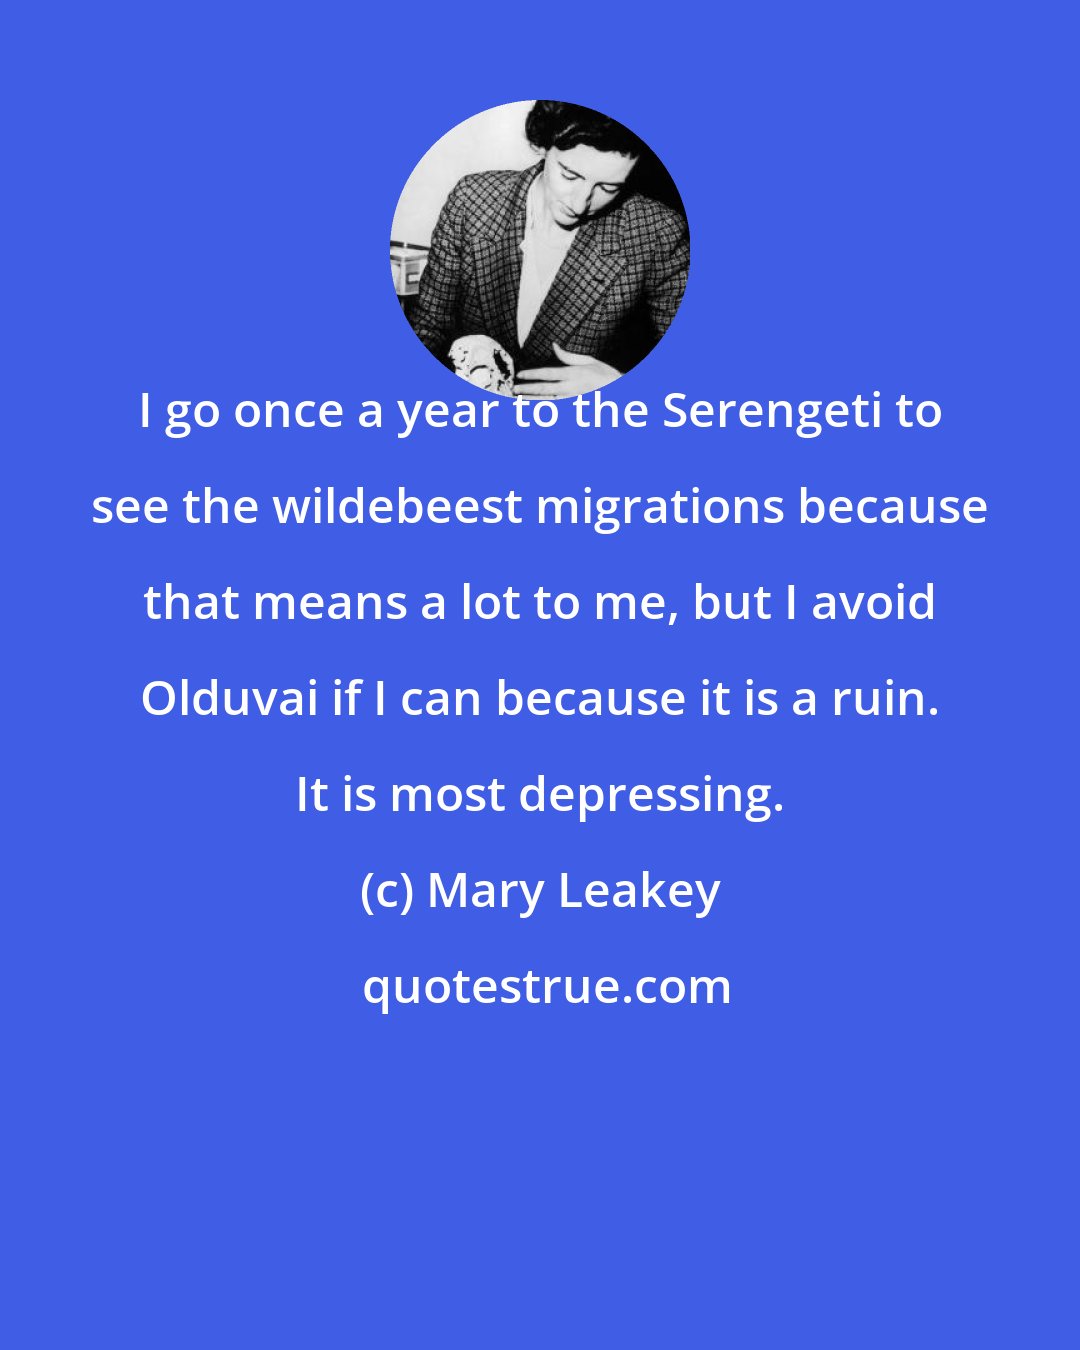 Mary Leakey: I go once a year to the Serengeti to see the wildebeest migrations because that means a lot to me, but I avoid Olduvai if I can because it is a ruin. It is most depressing.